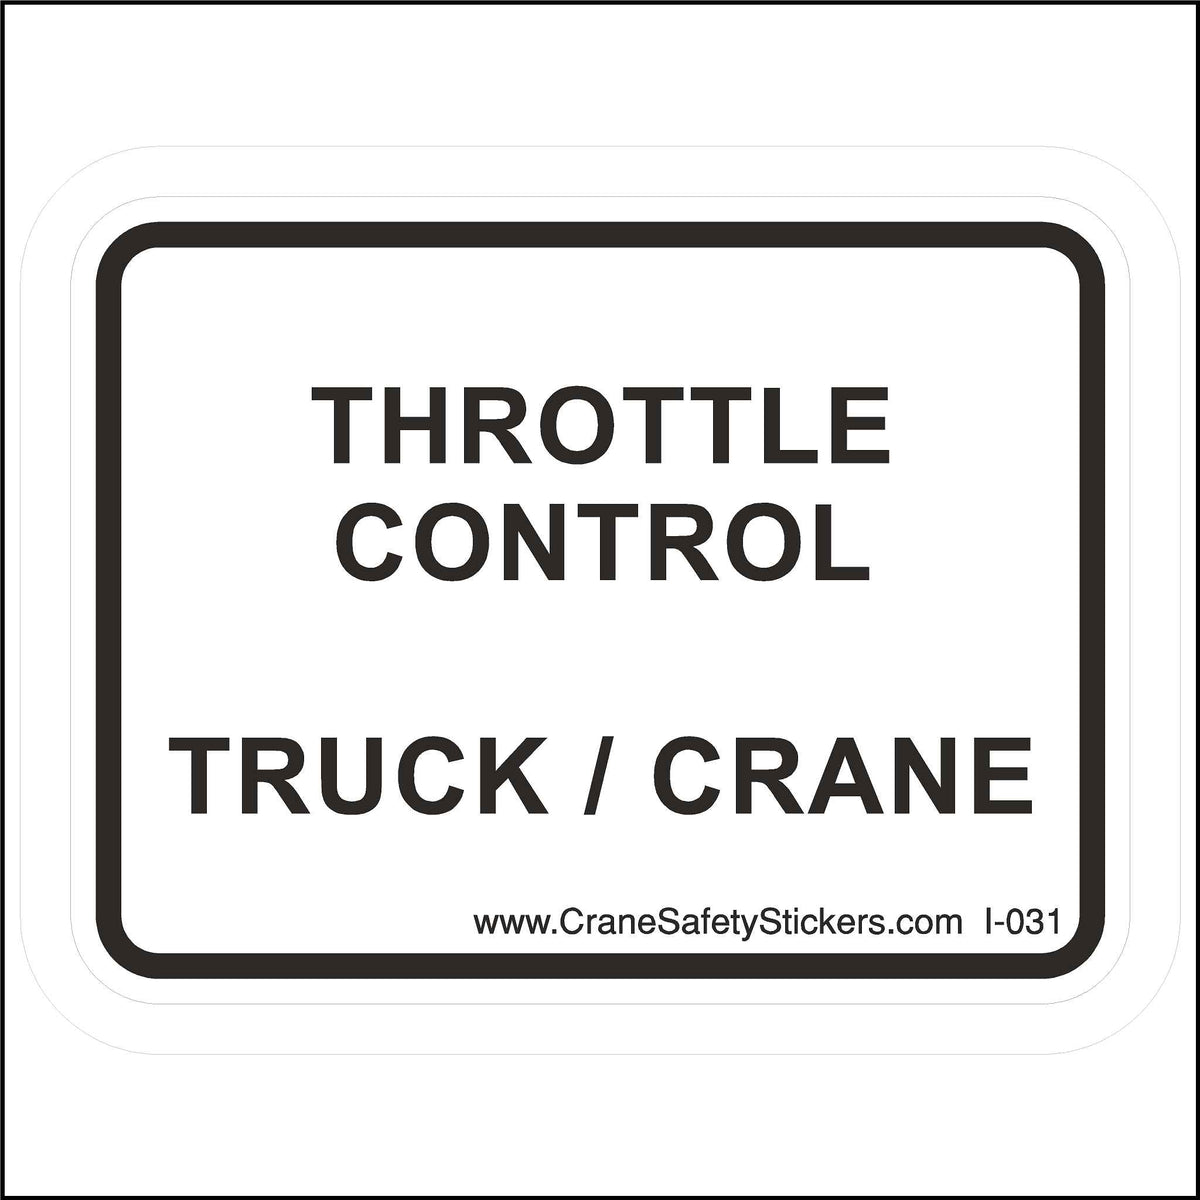 Throttle Control For Truck And Crane Boom Truck Label Printed With. Throttle Control Truck or Crane.